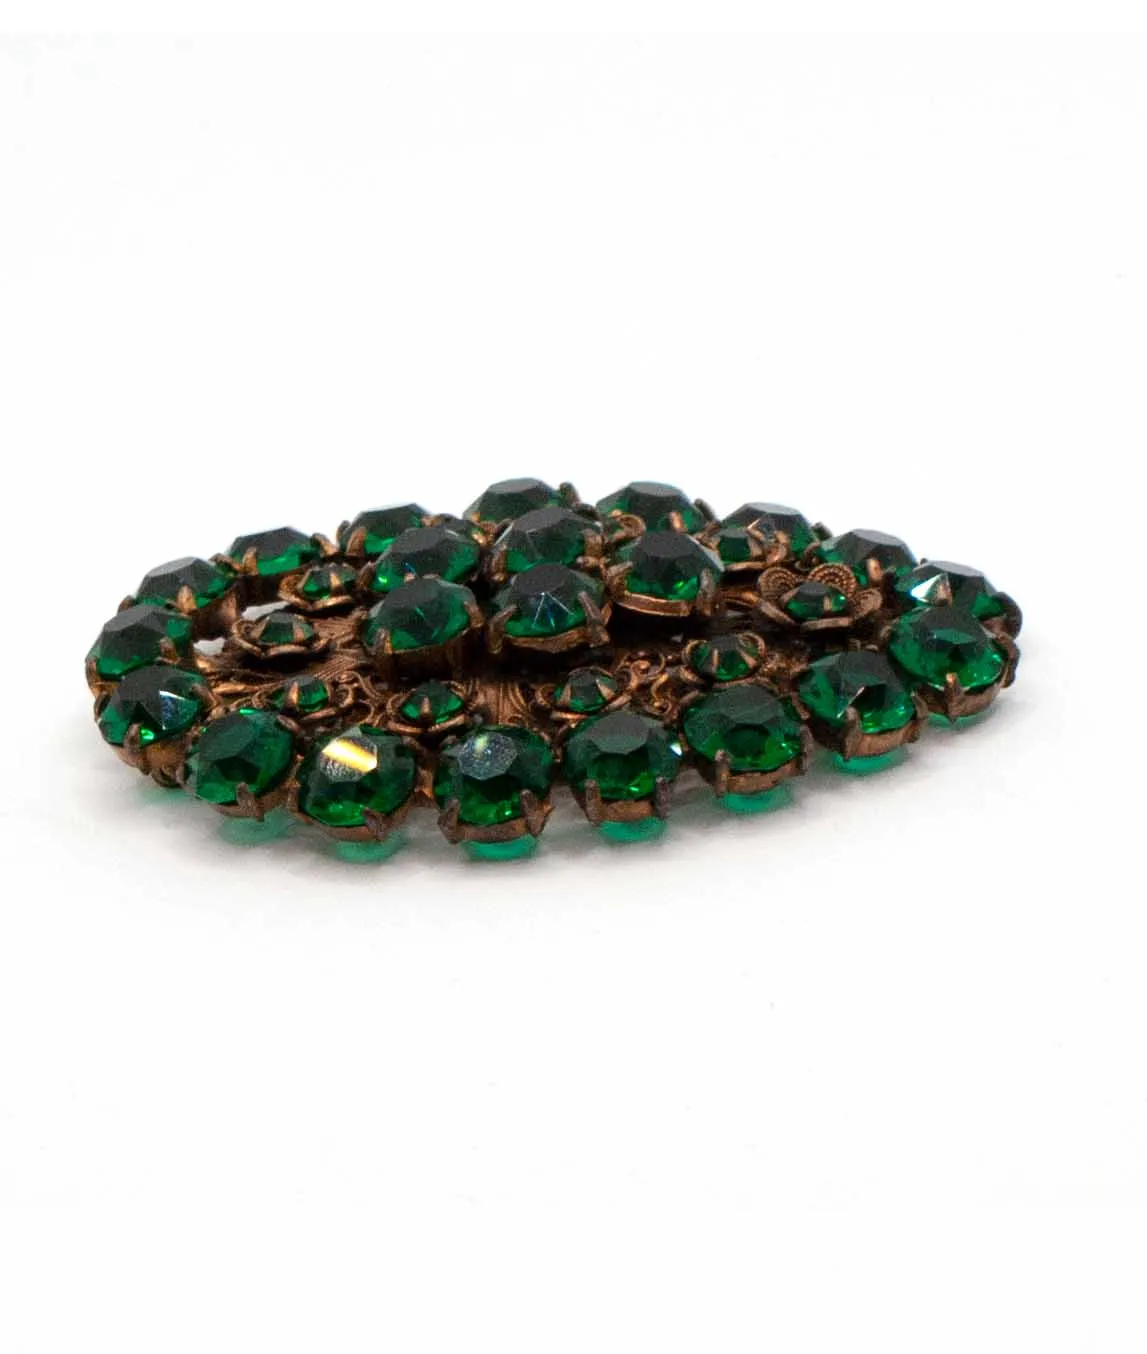 Dress clip set with dark emerald green glass crystals side view